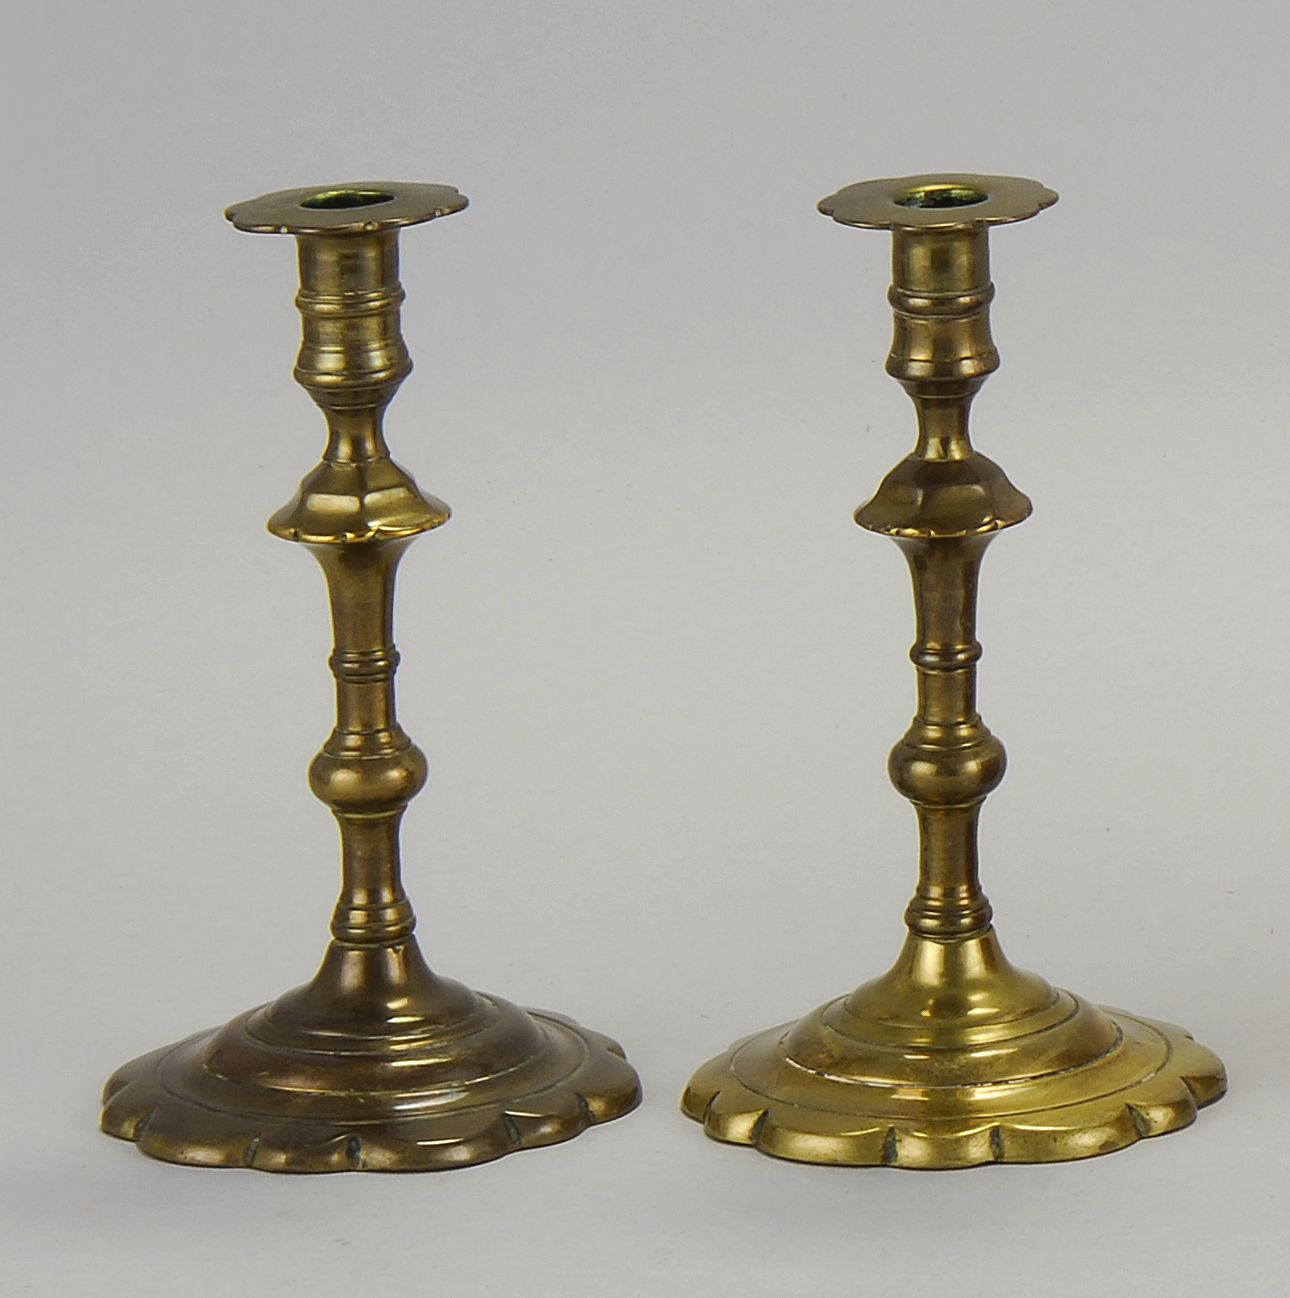 PAIR OF EARLY QUEEN ANNE BRASS 14a839